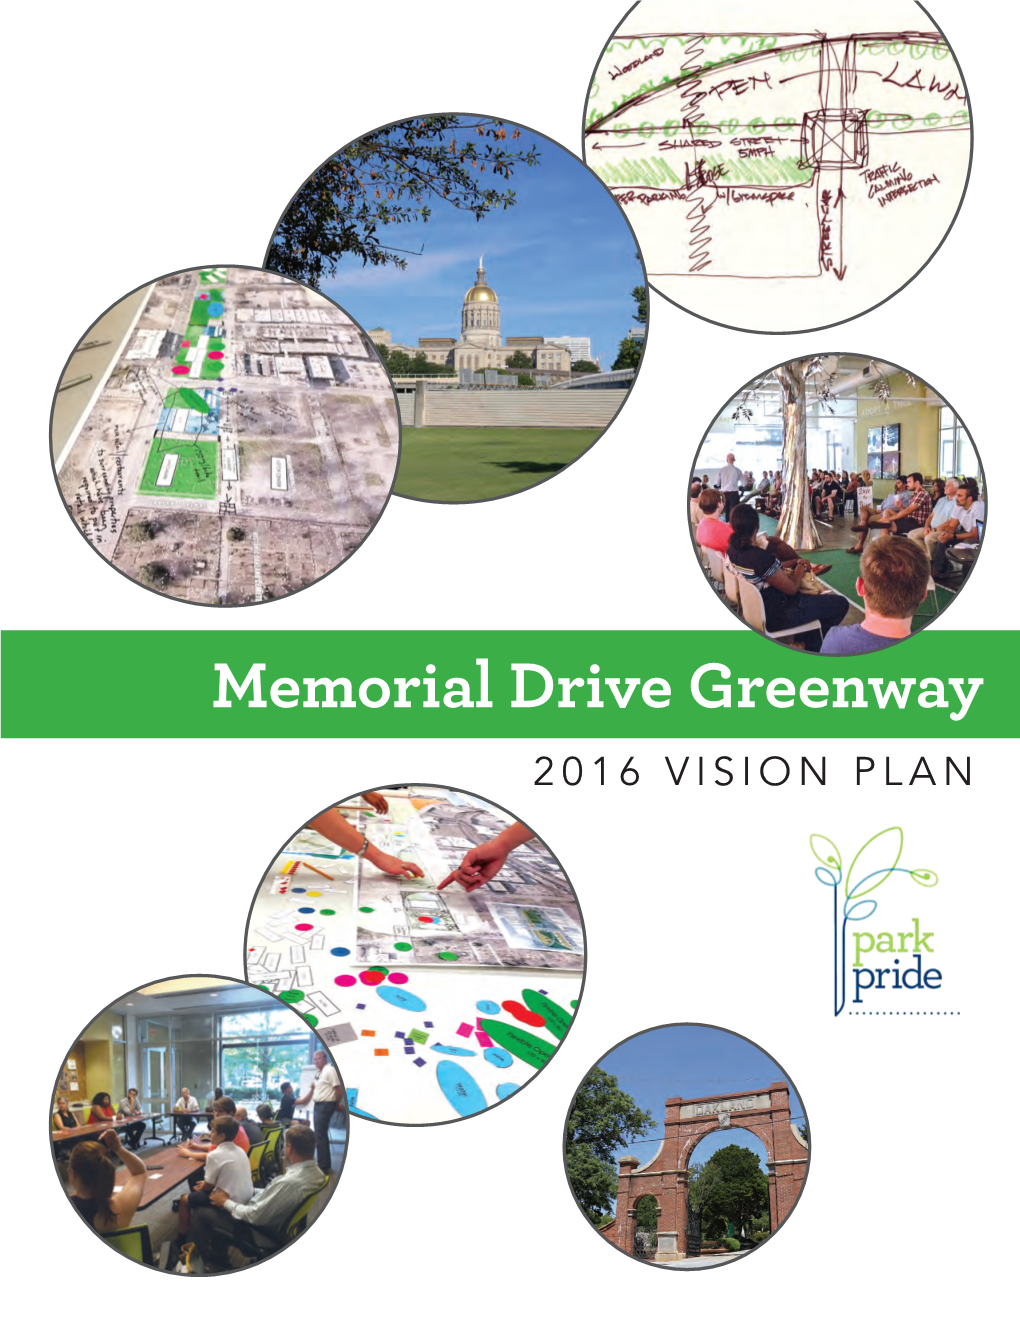 Memorial Drive Greenway 2016 VISION PLAN “One Day, I Dream This Park Will Enliven the Area I Call Home.” - Community Member